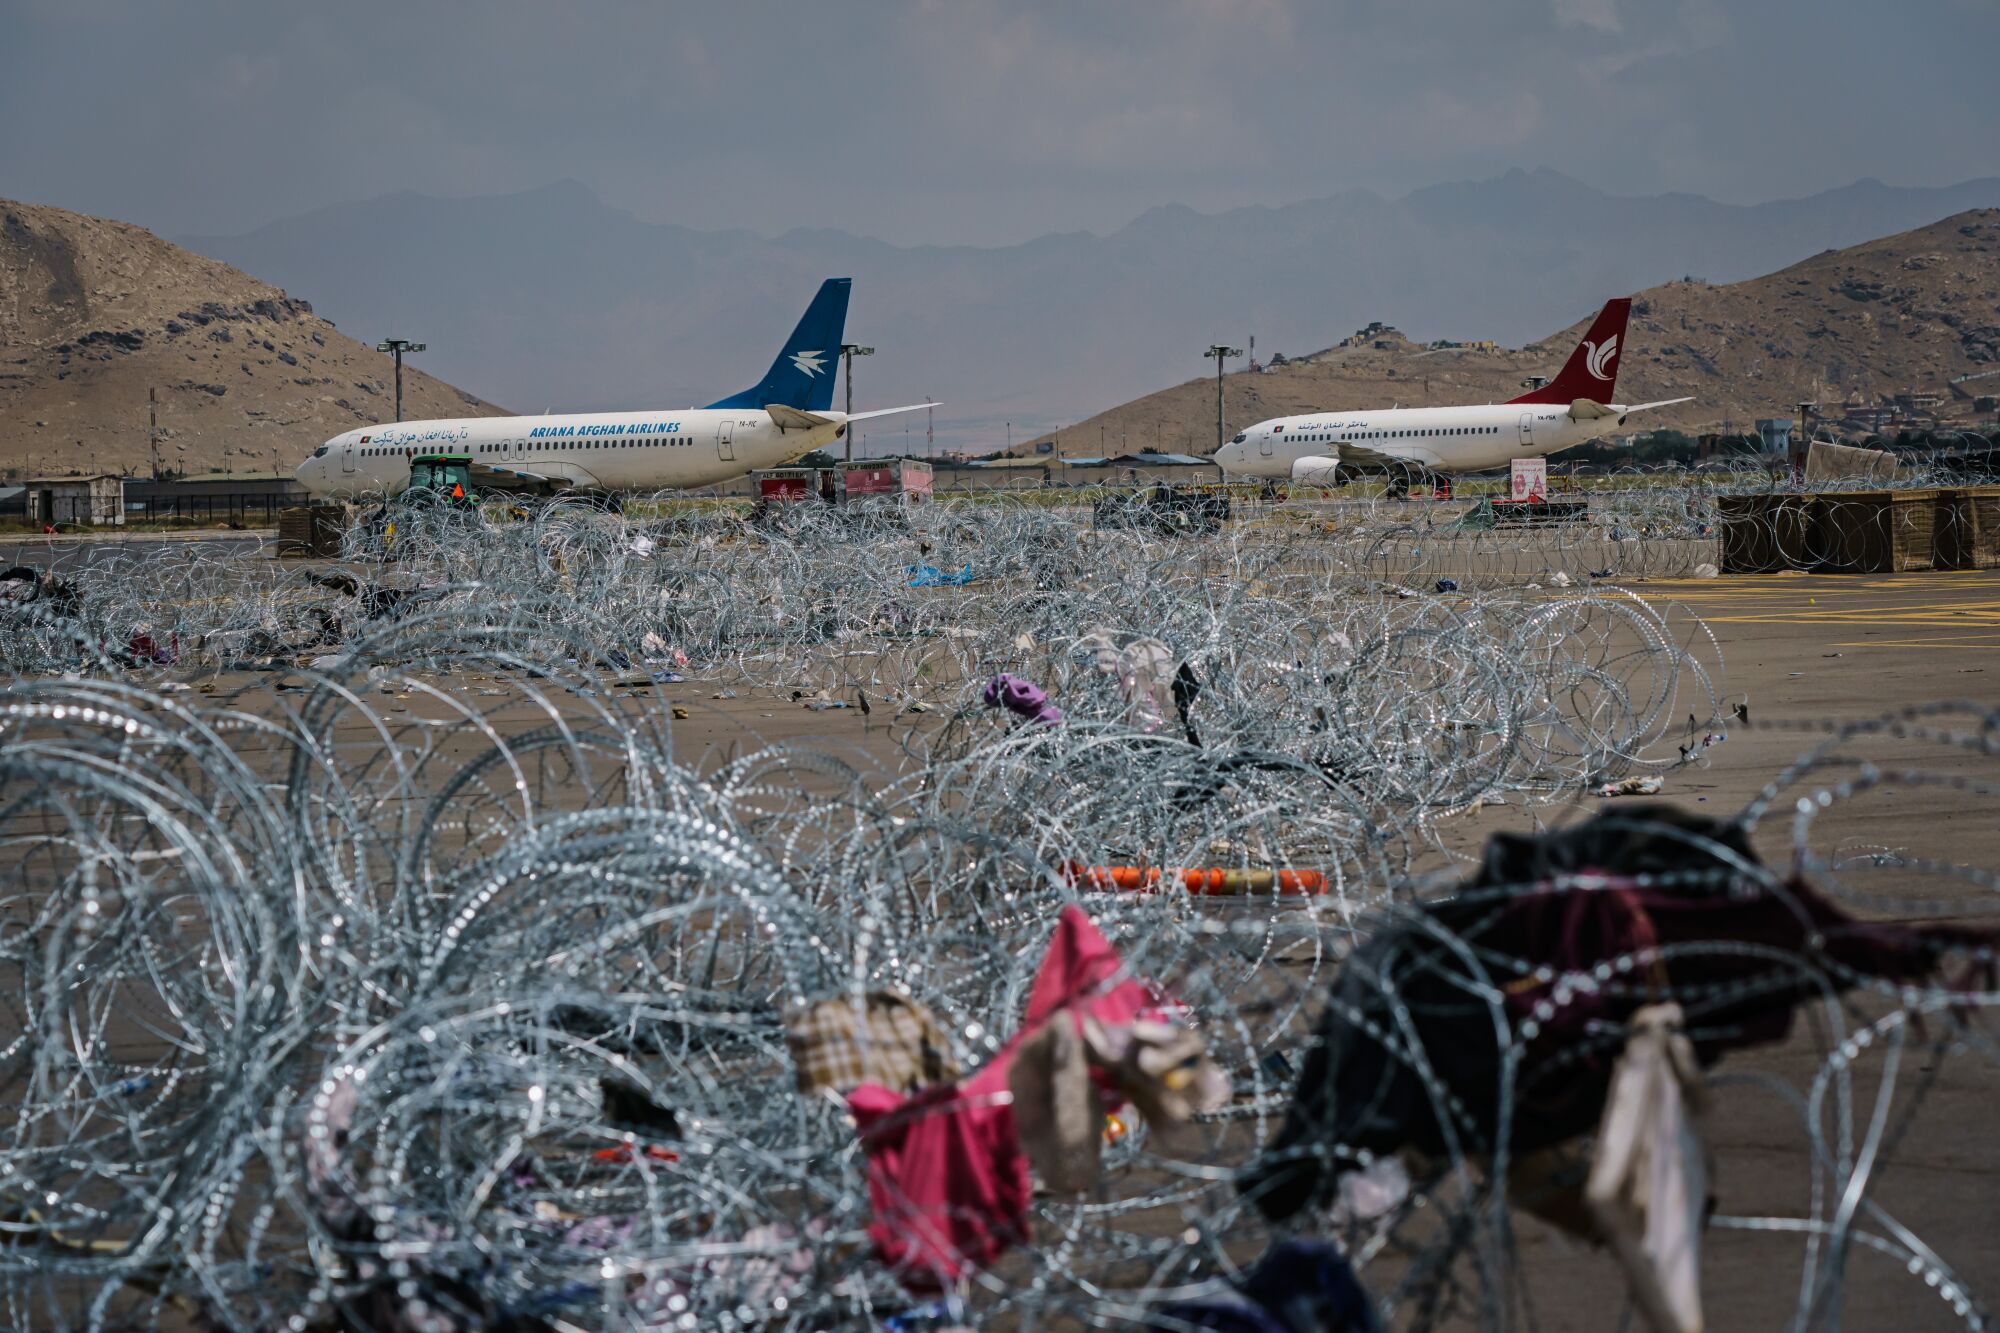 Barbed wire covers the ground with jetliners in the background